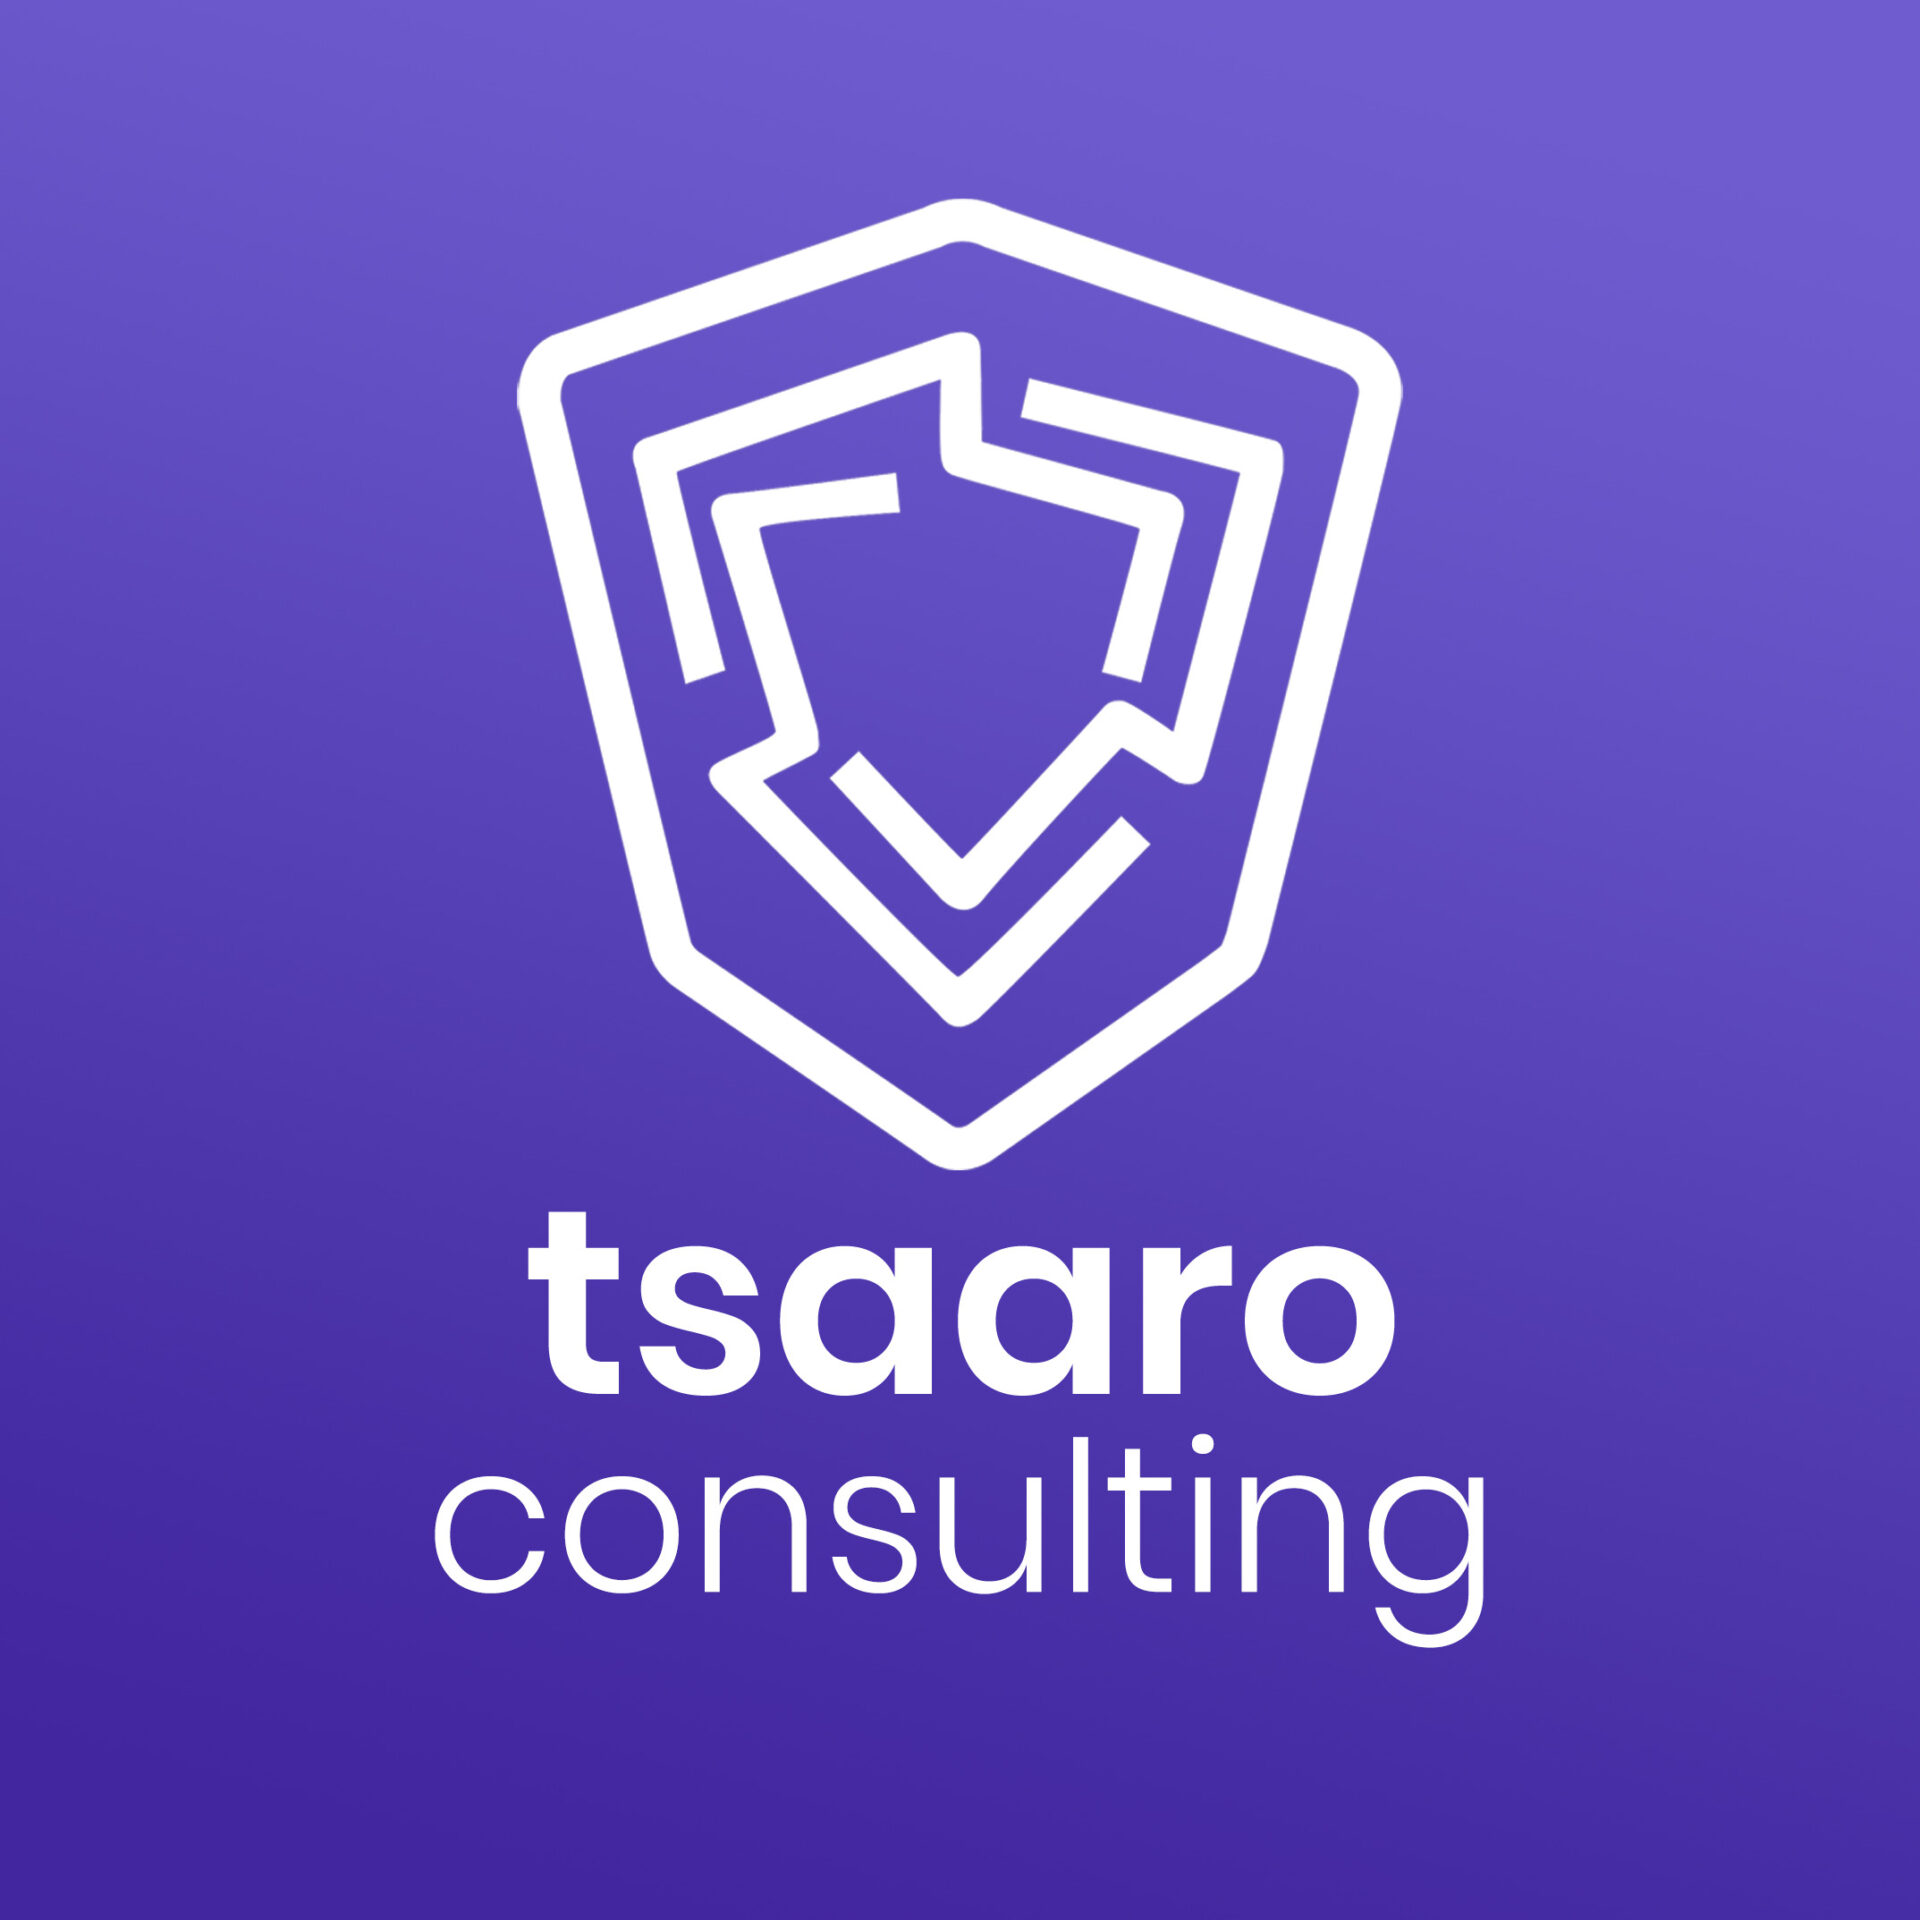 Data Privacy Consulting Services - Tsaaro Consulting